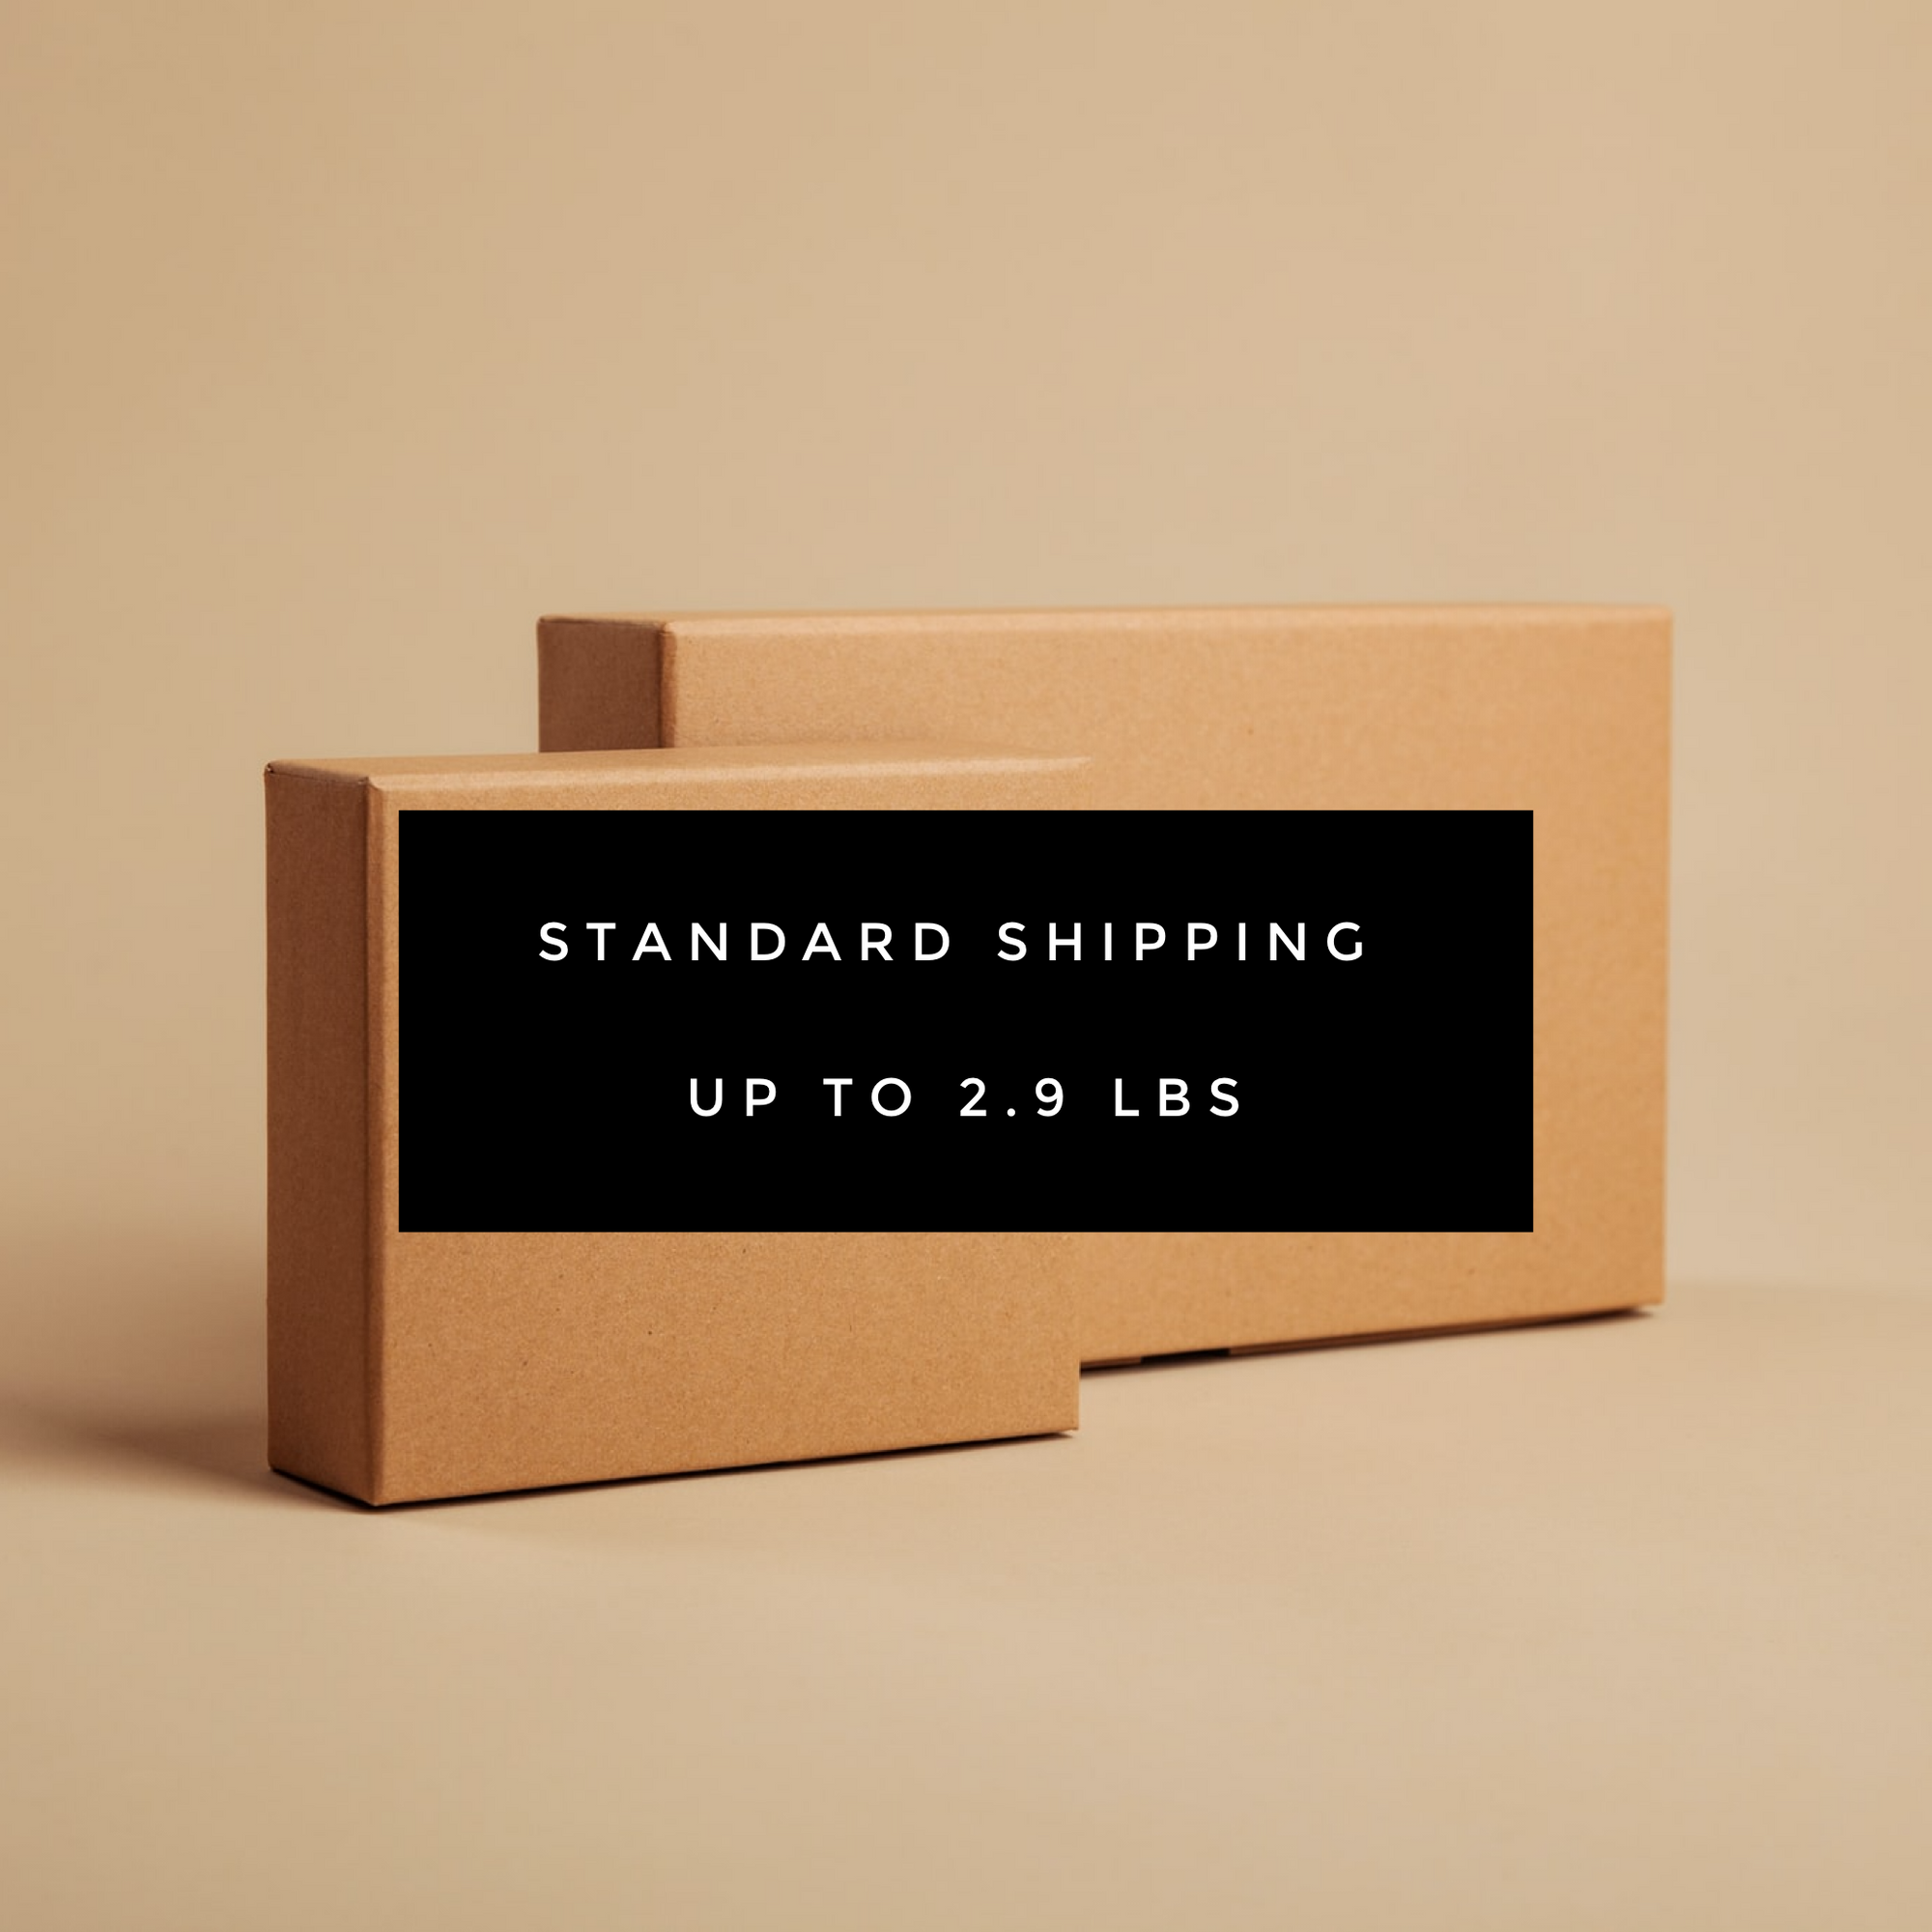 Standard Shipping up to 2.9 lbs